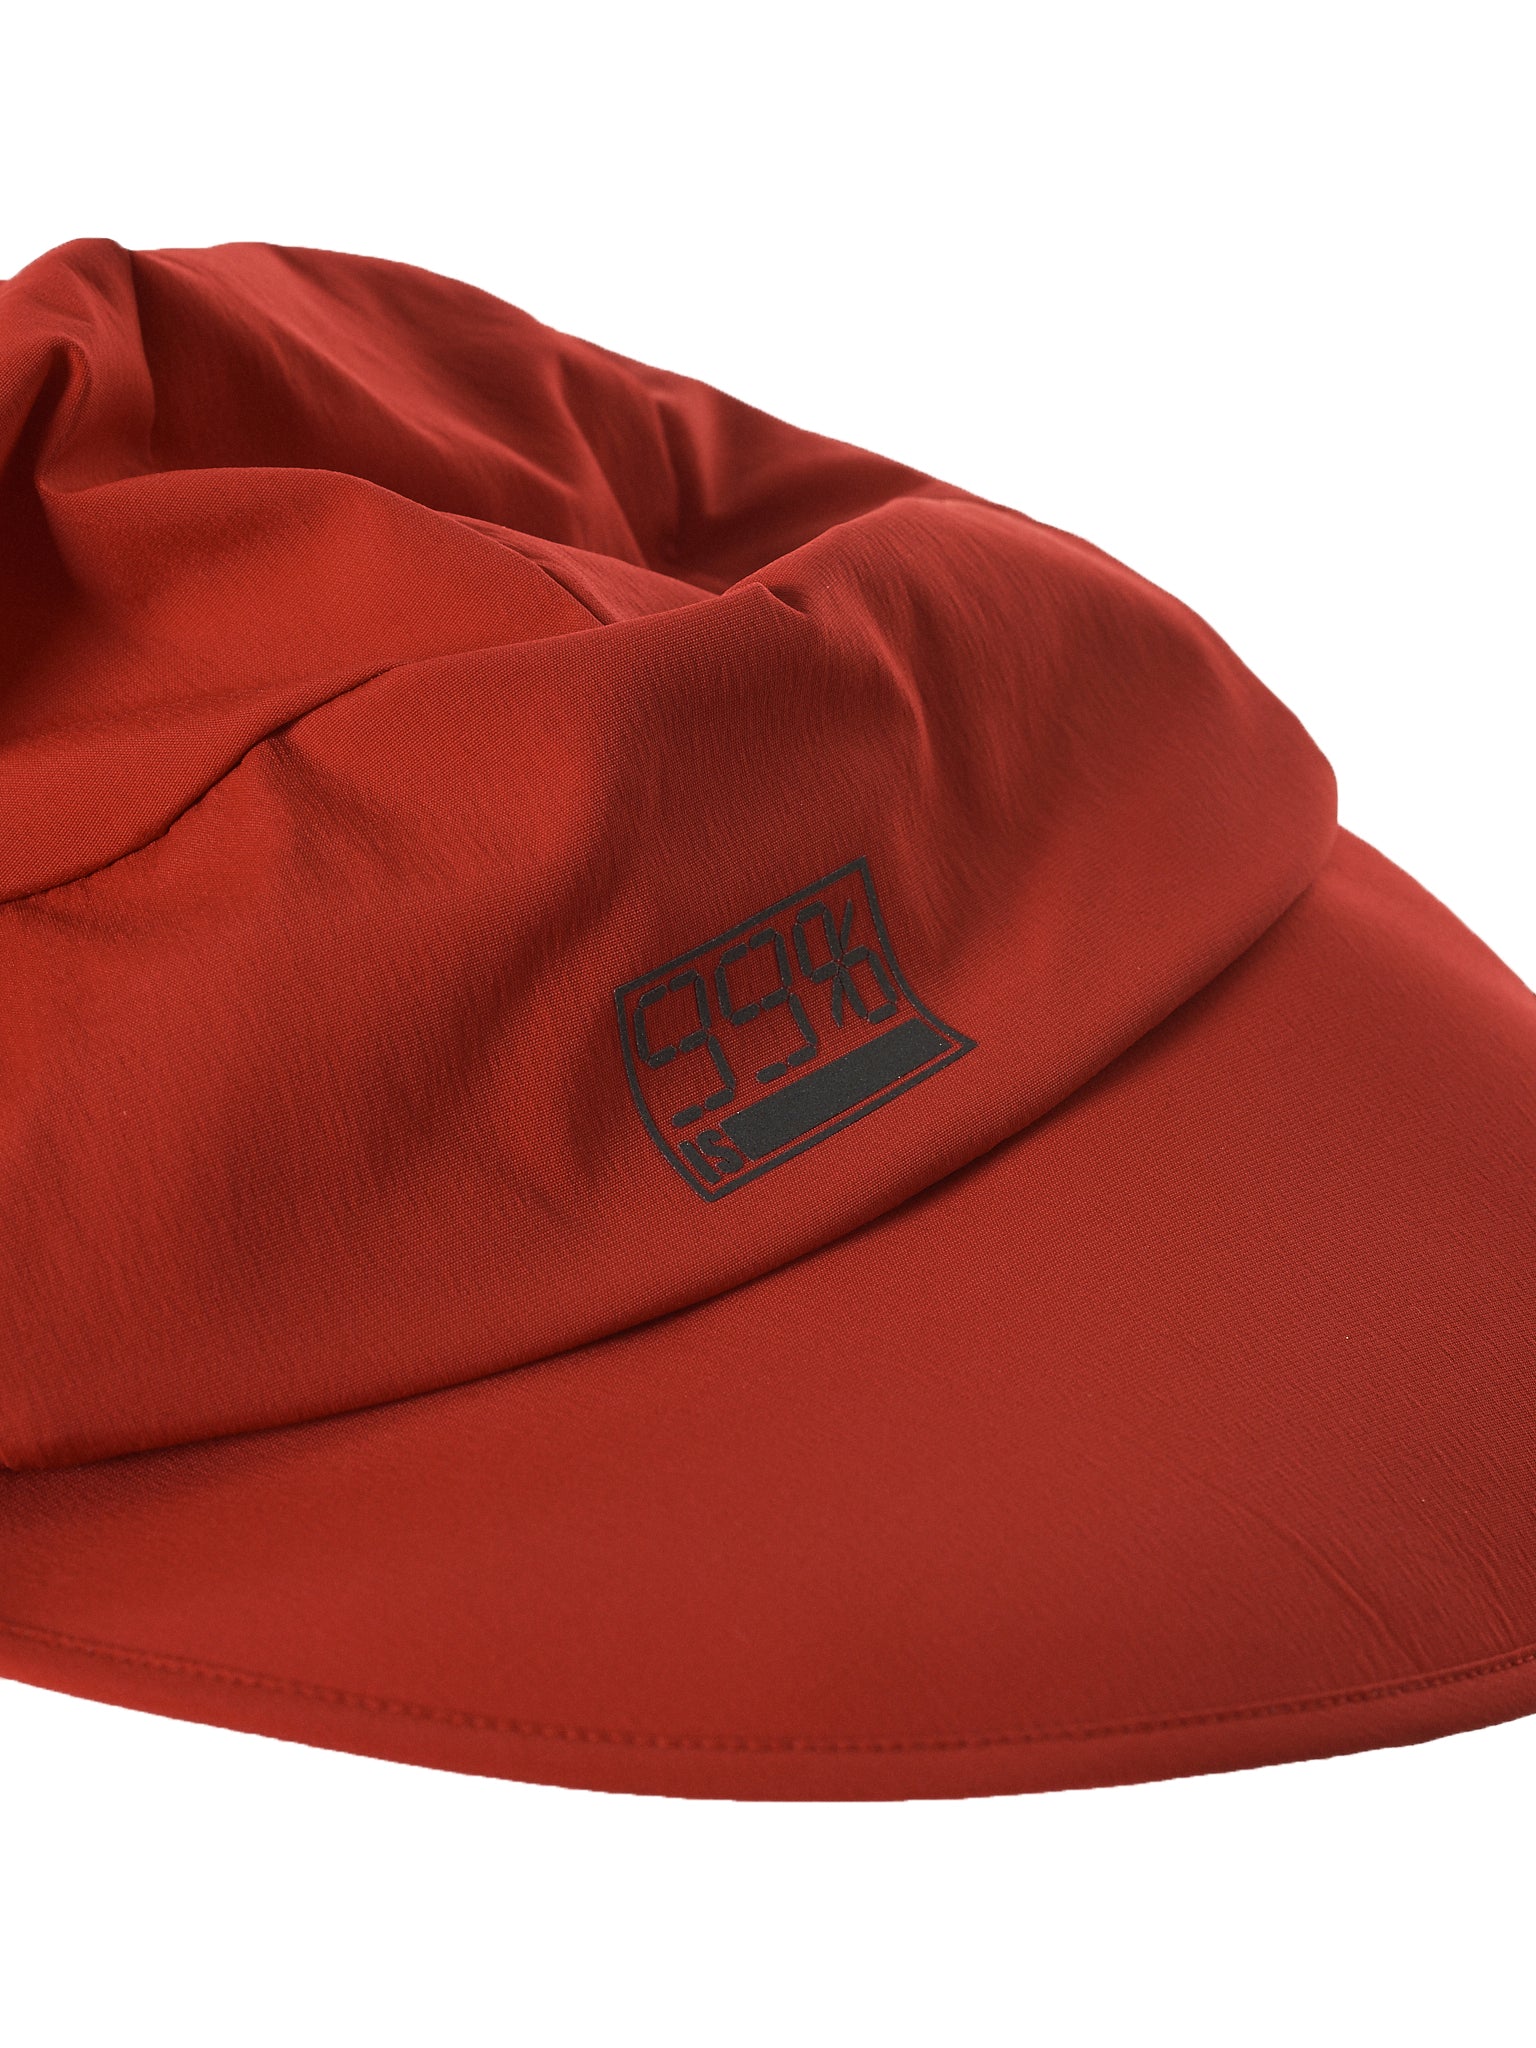 'Night To Dreams' Shielded Cap (NN11-ACC01-RED)